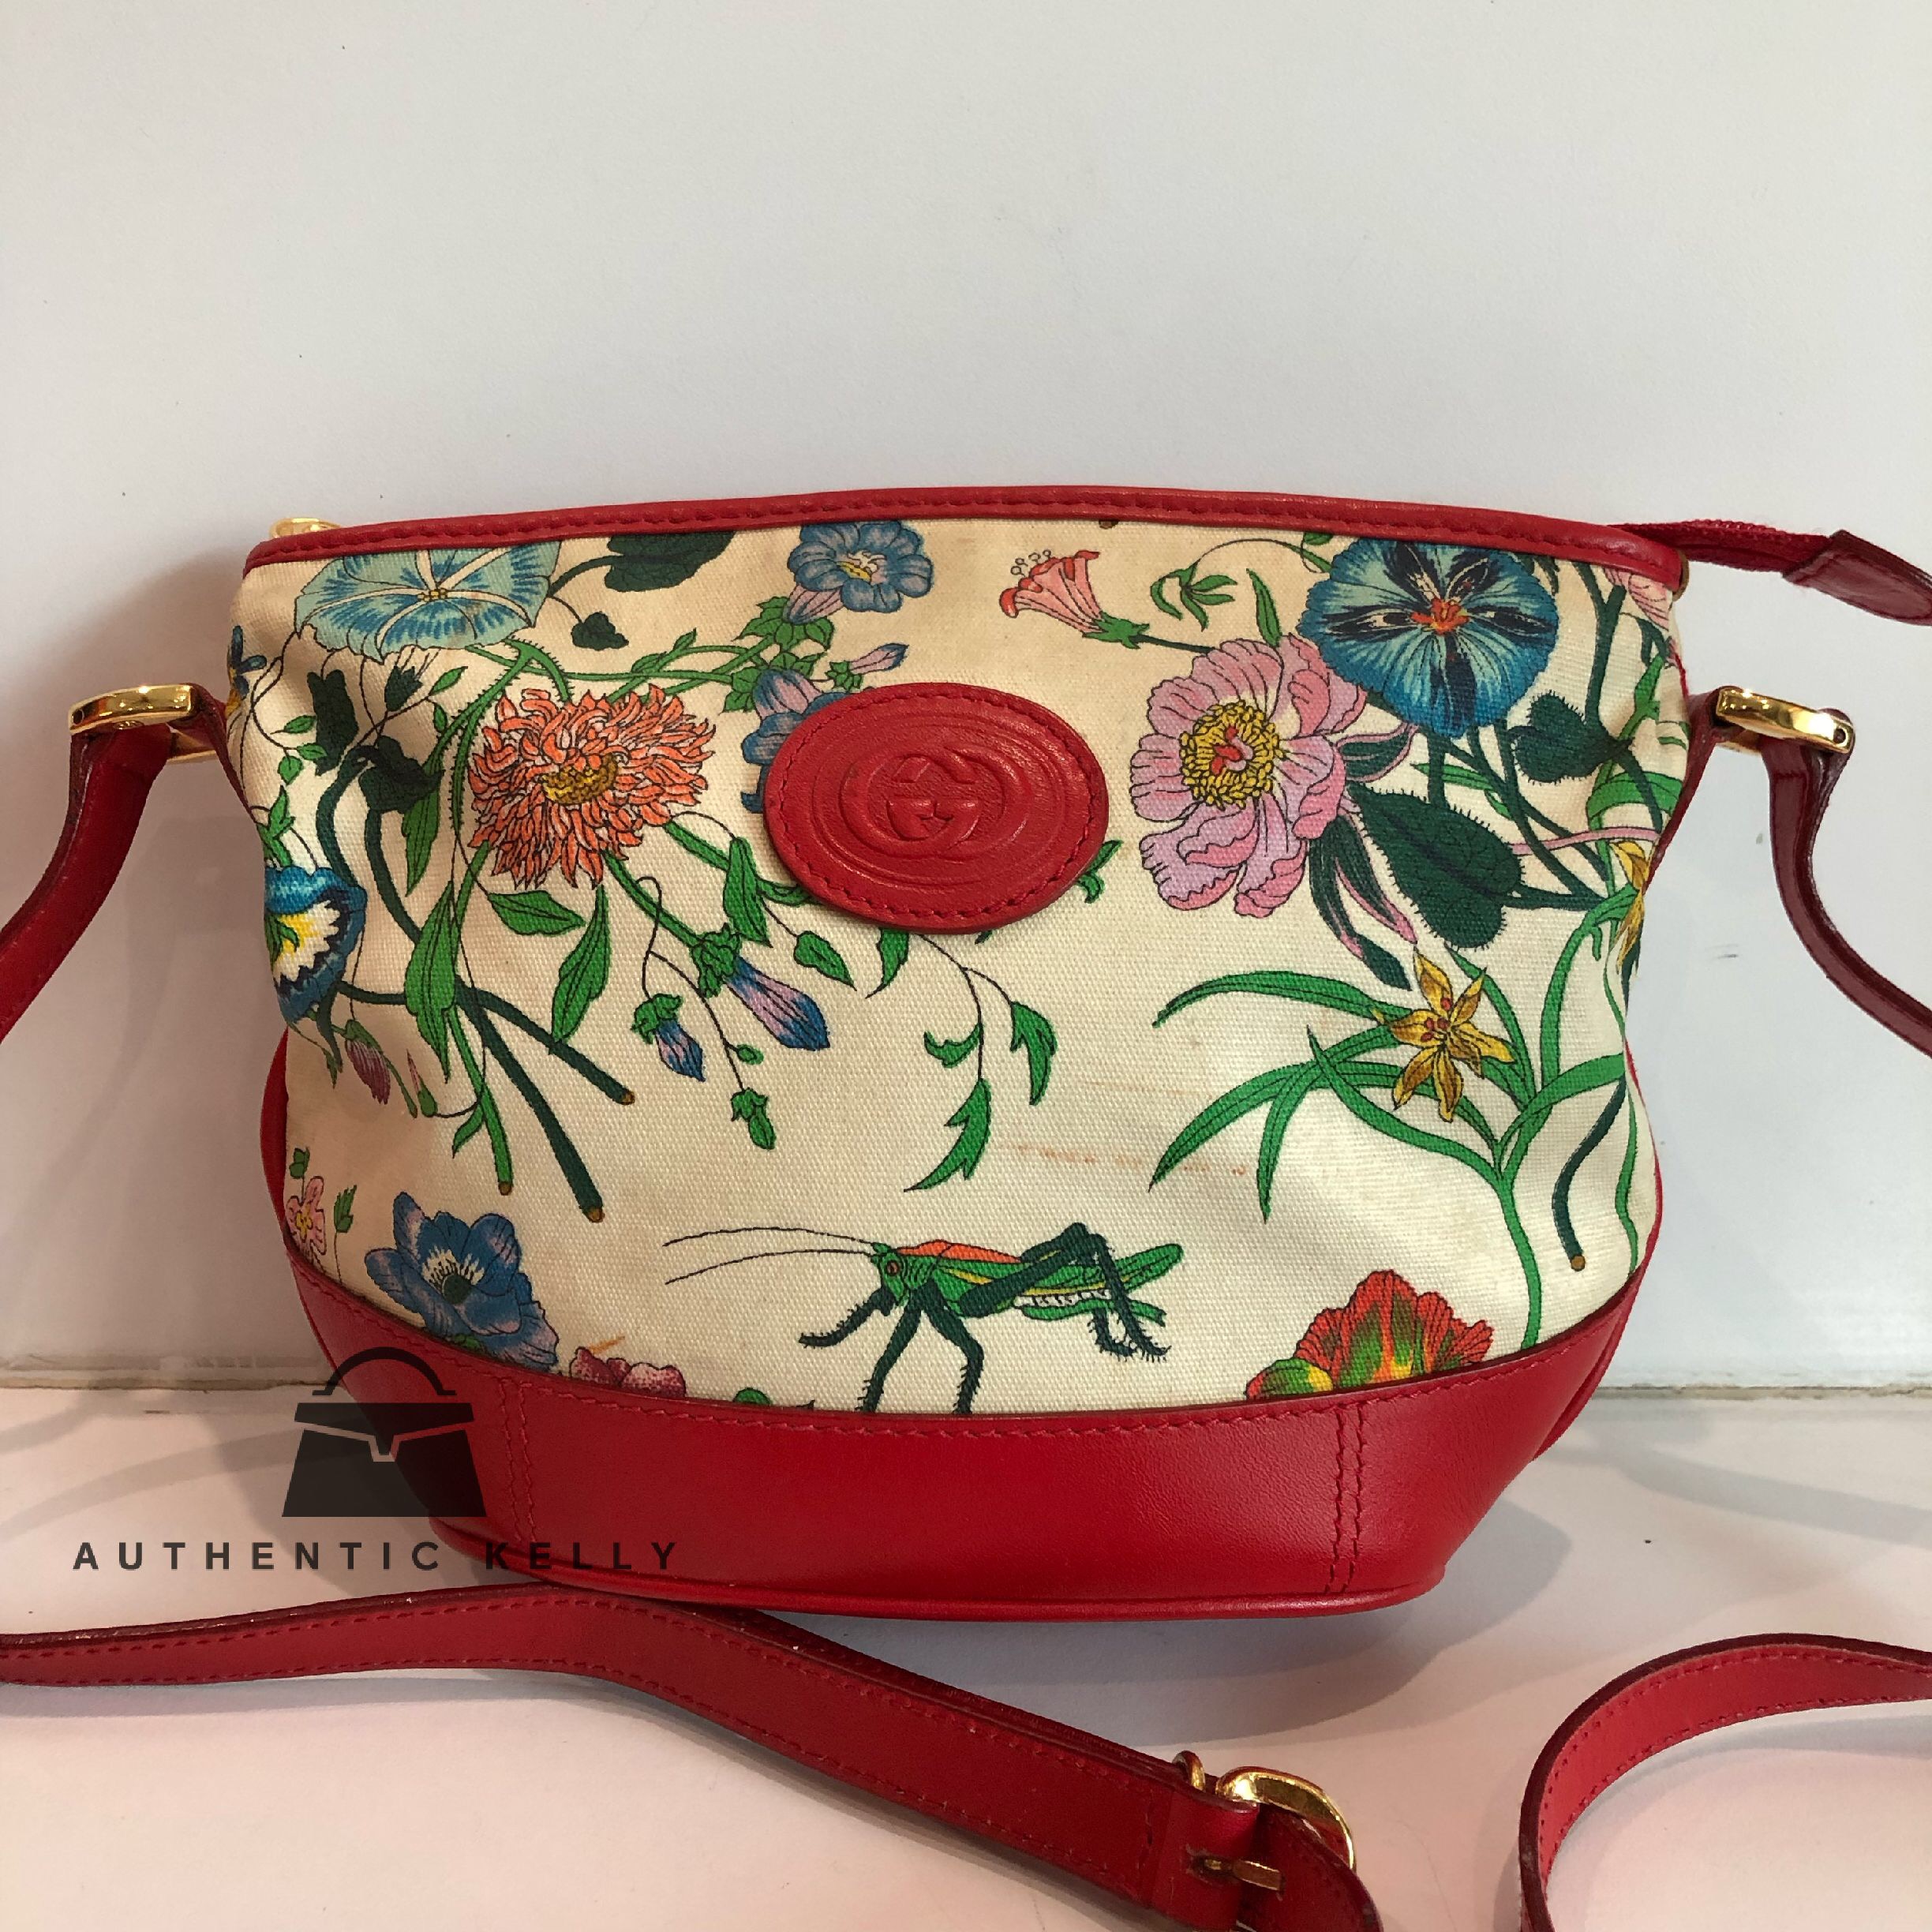 gucci red flower bag